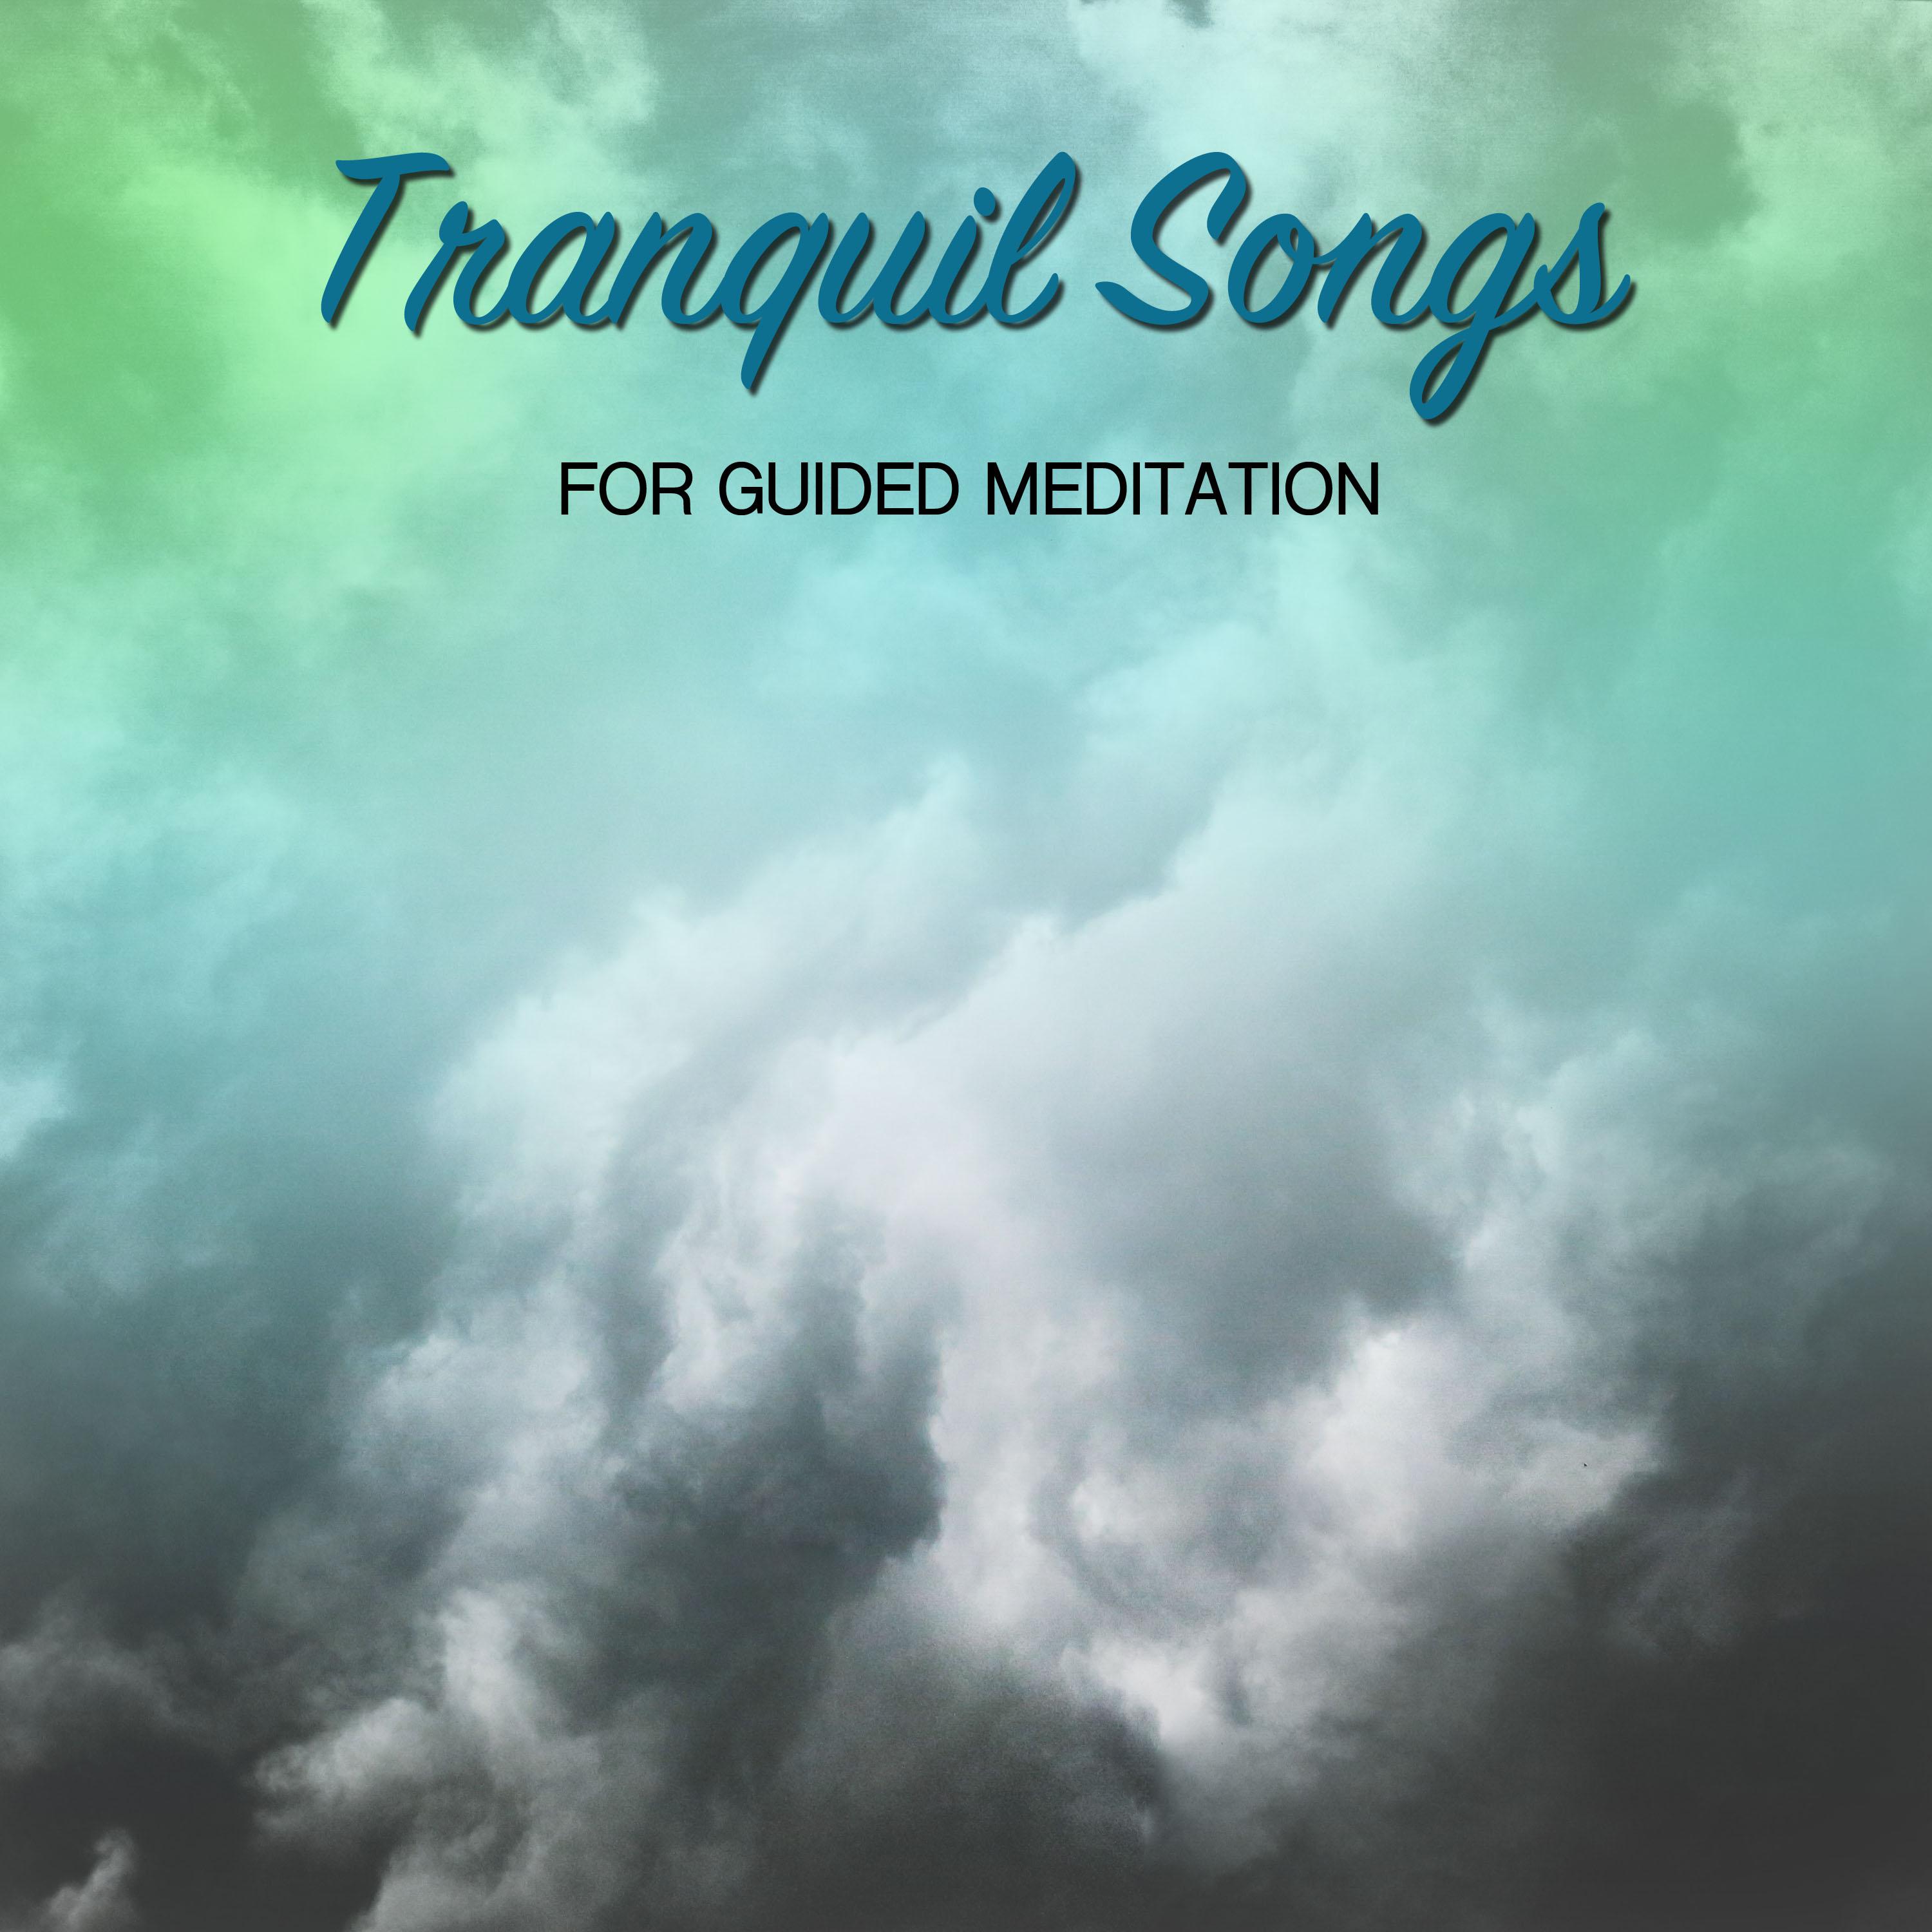 16 Tranquil Songs for Guided Meditation